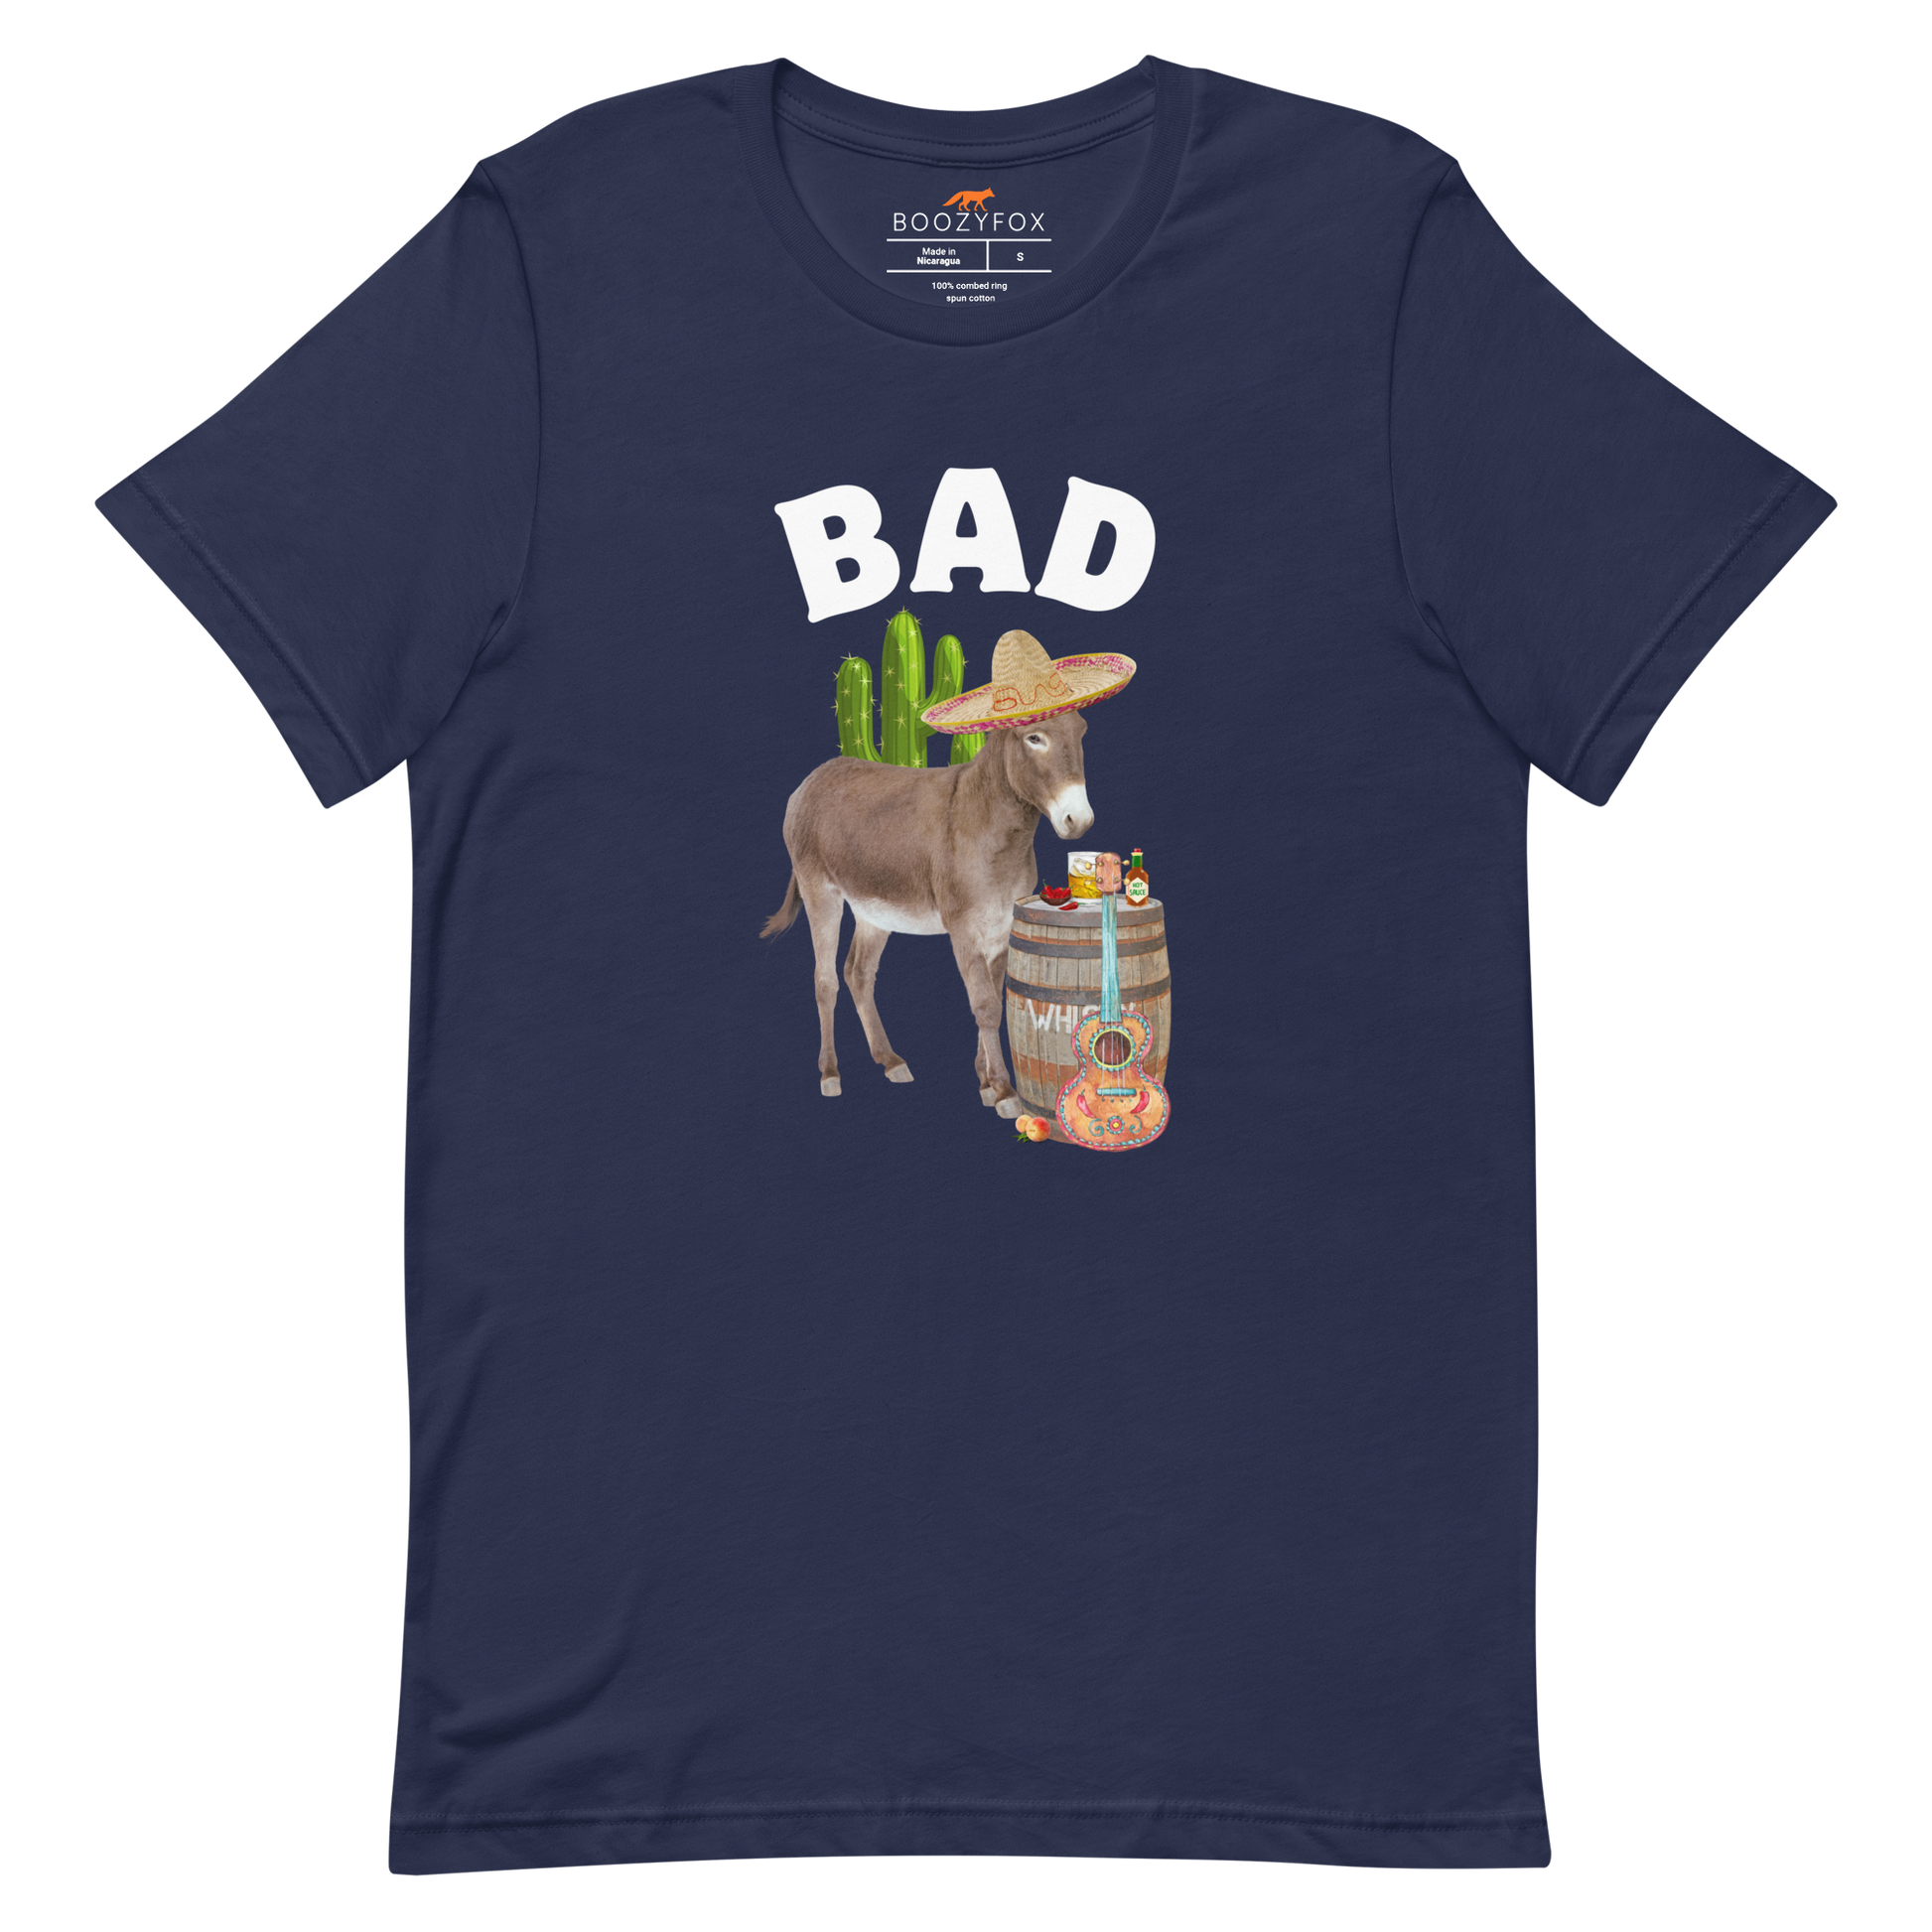 Navy Premium Donkey Tee featuring a Funny Bad Ass Donkey graphic on the chest - Funny Graphic Bad Ass Donkey Tees - Boozy Fox